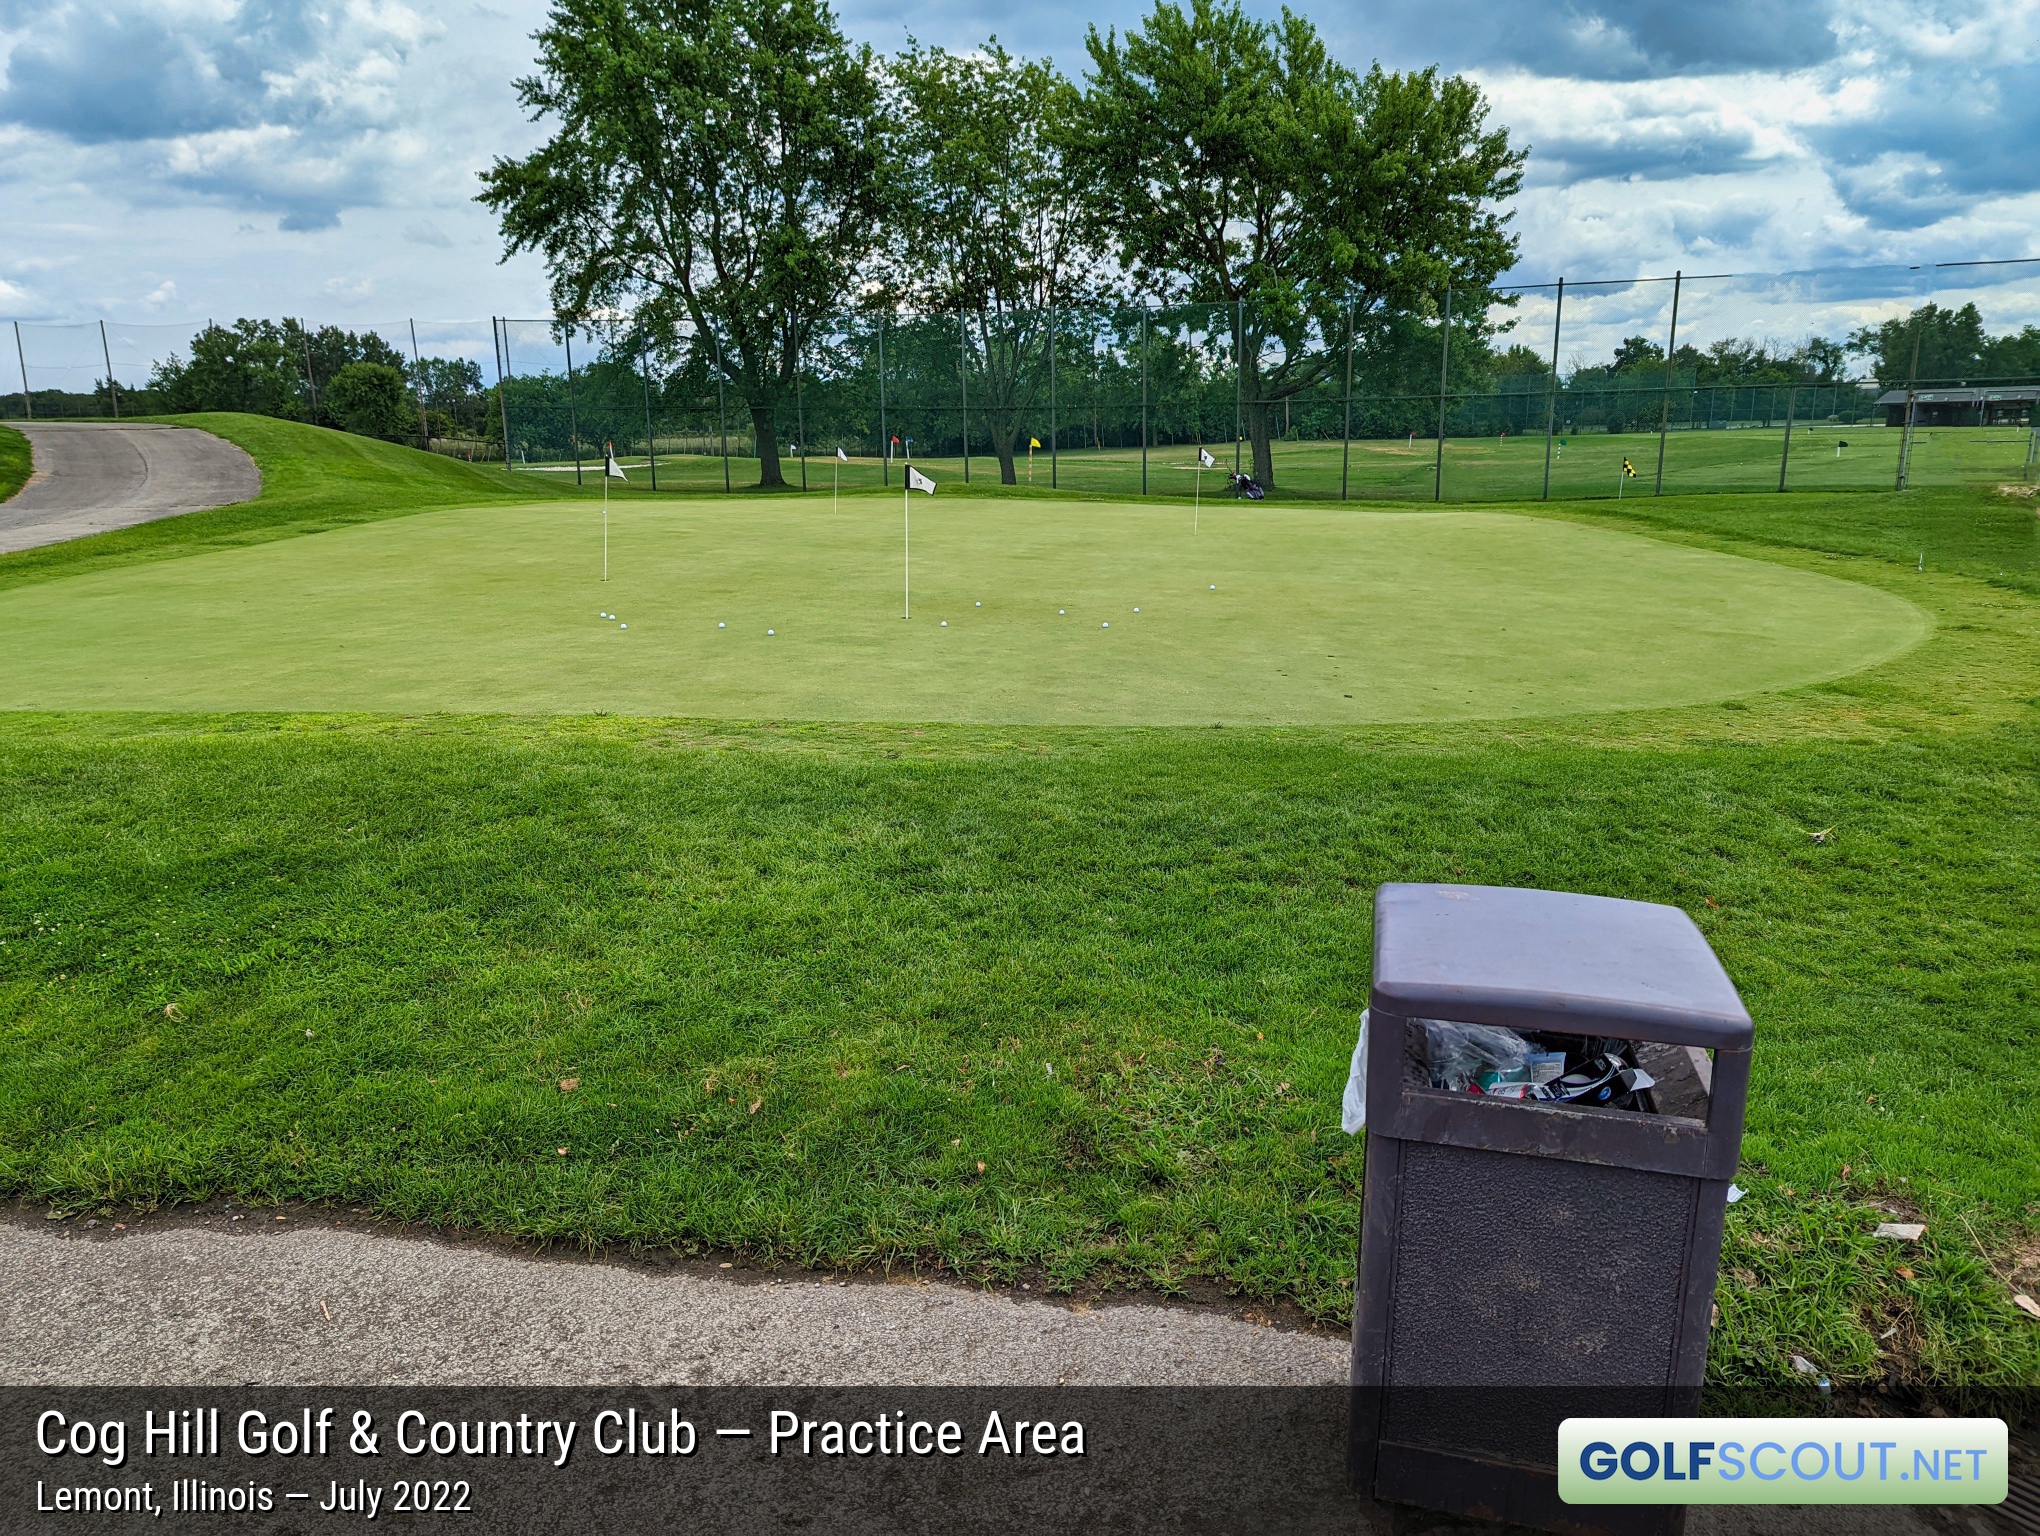 Photo of the practice area at Cog Hill Course #3 in Lemont, Illinois. Another practice green, to the left of the range, when facing it from the parking lot.